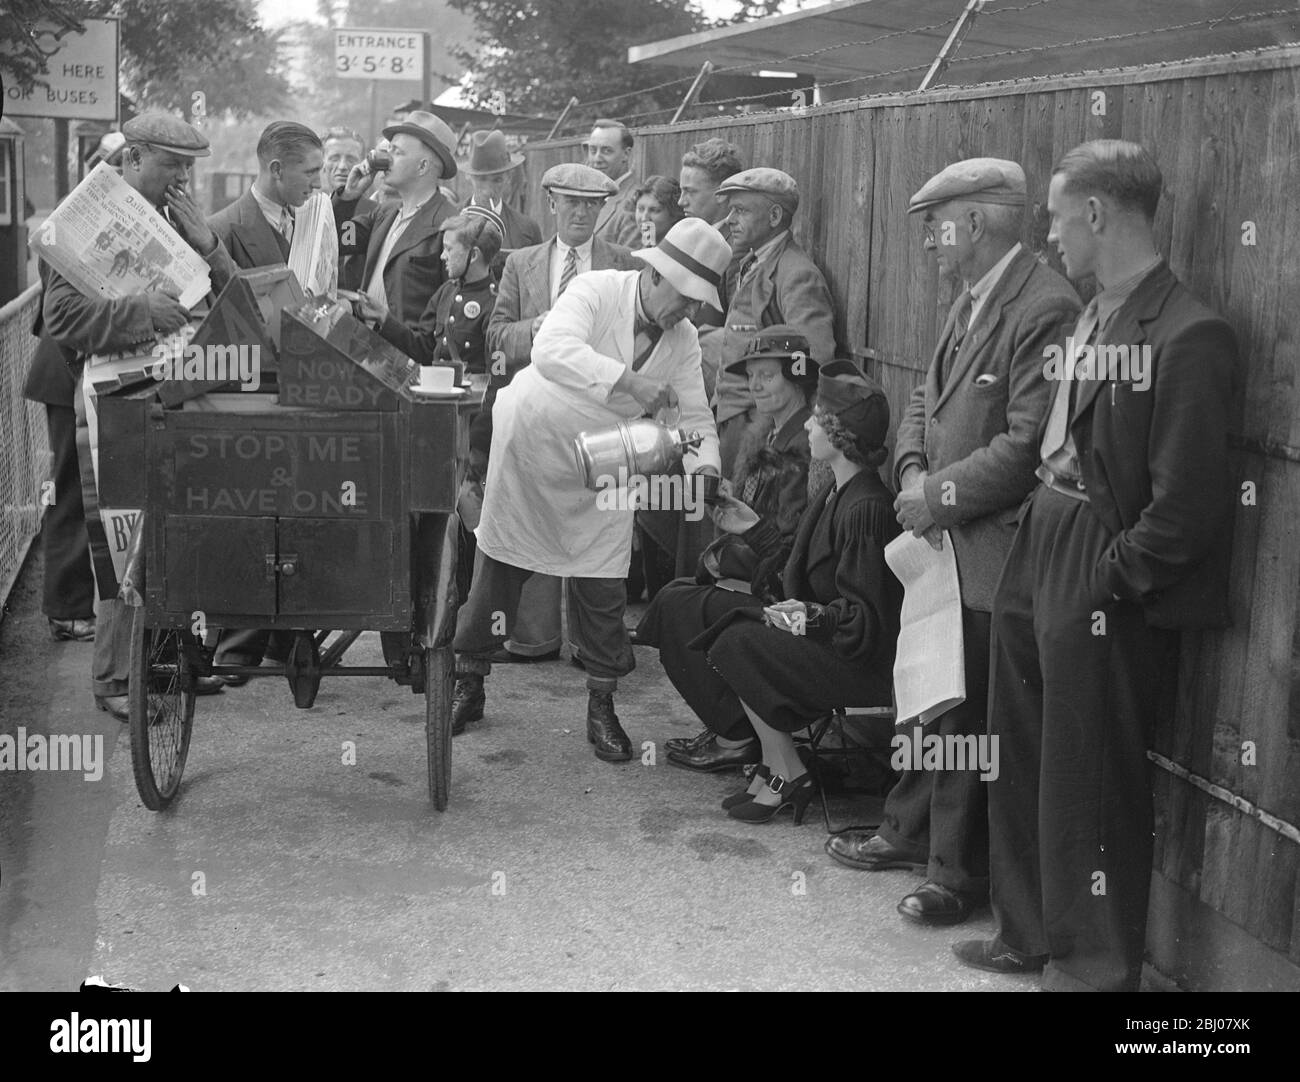 Queue for opening of Wimbledon. Refreshment from 'mobile cafe'. - A 'mobile cafe'provide welcome refreshments for tennis enthusiasts, he queued up for hours outside the all England Club at Wimbledon for the opening of the Championships. - Photo shows, serving out to sea from the 'mobile cafe' at Wimbledon. - 21 June 1937 Stock Photo